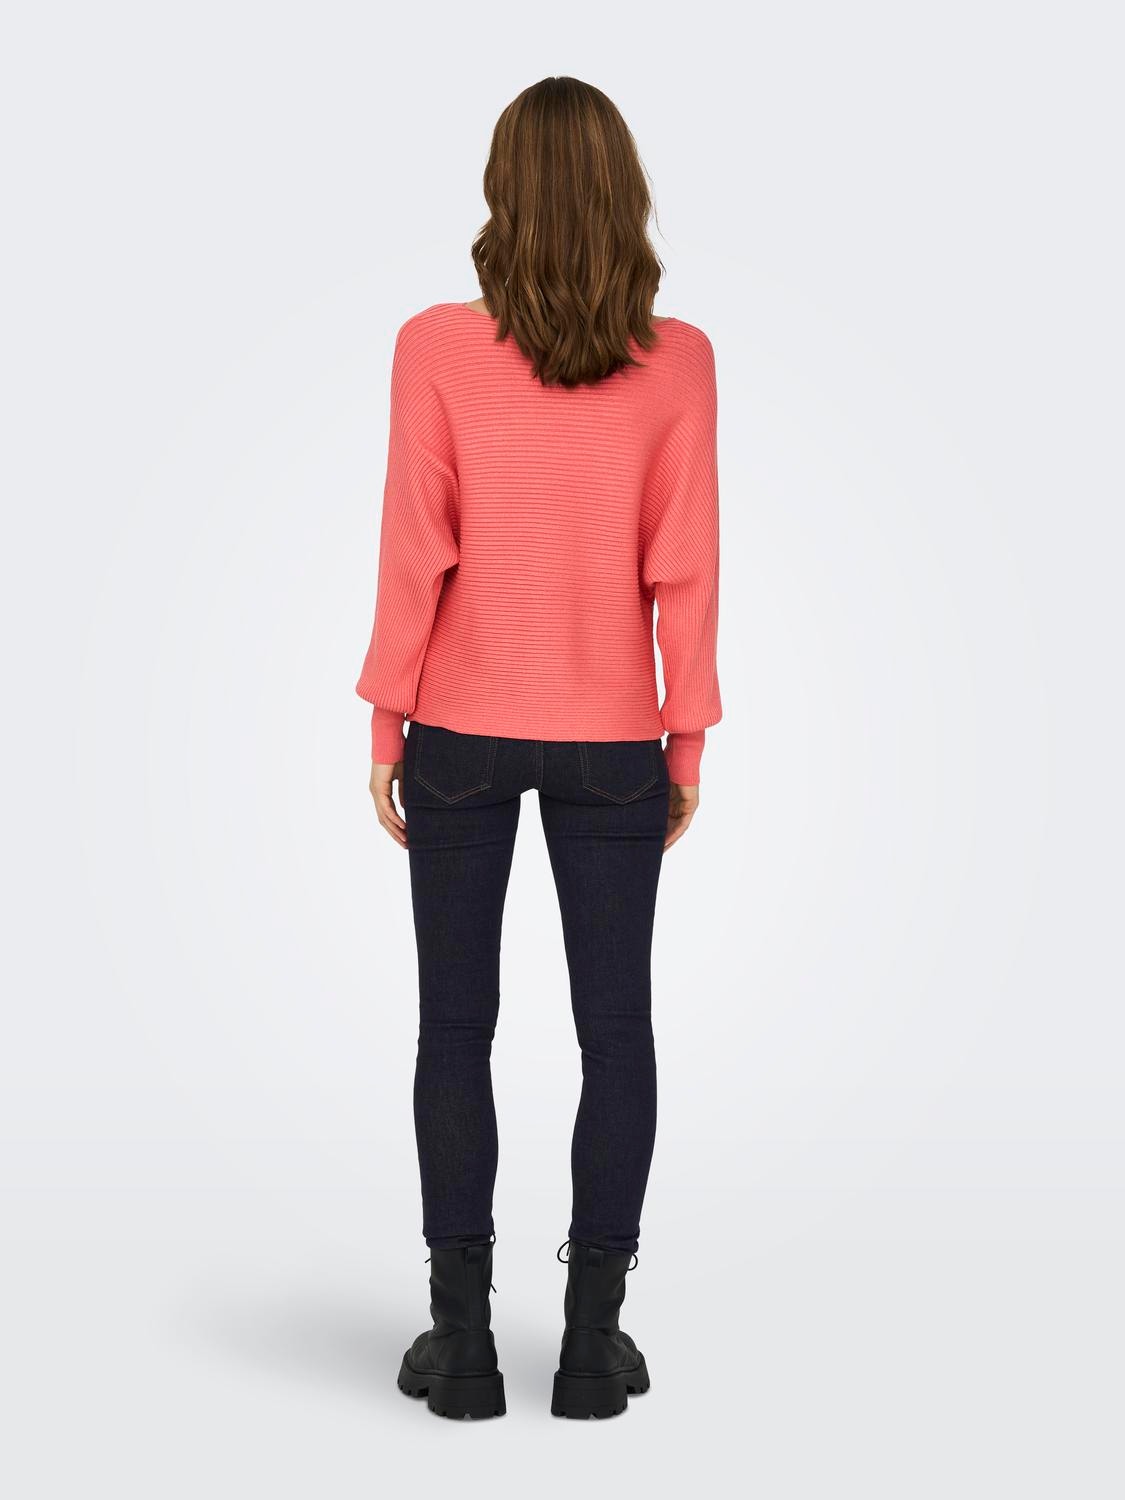 ONLY Pull-overs Col bateau Bas hauts -Tea Rose - 15226298